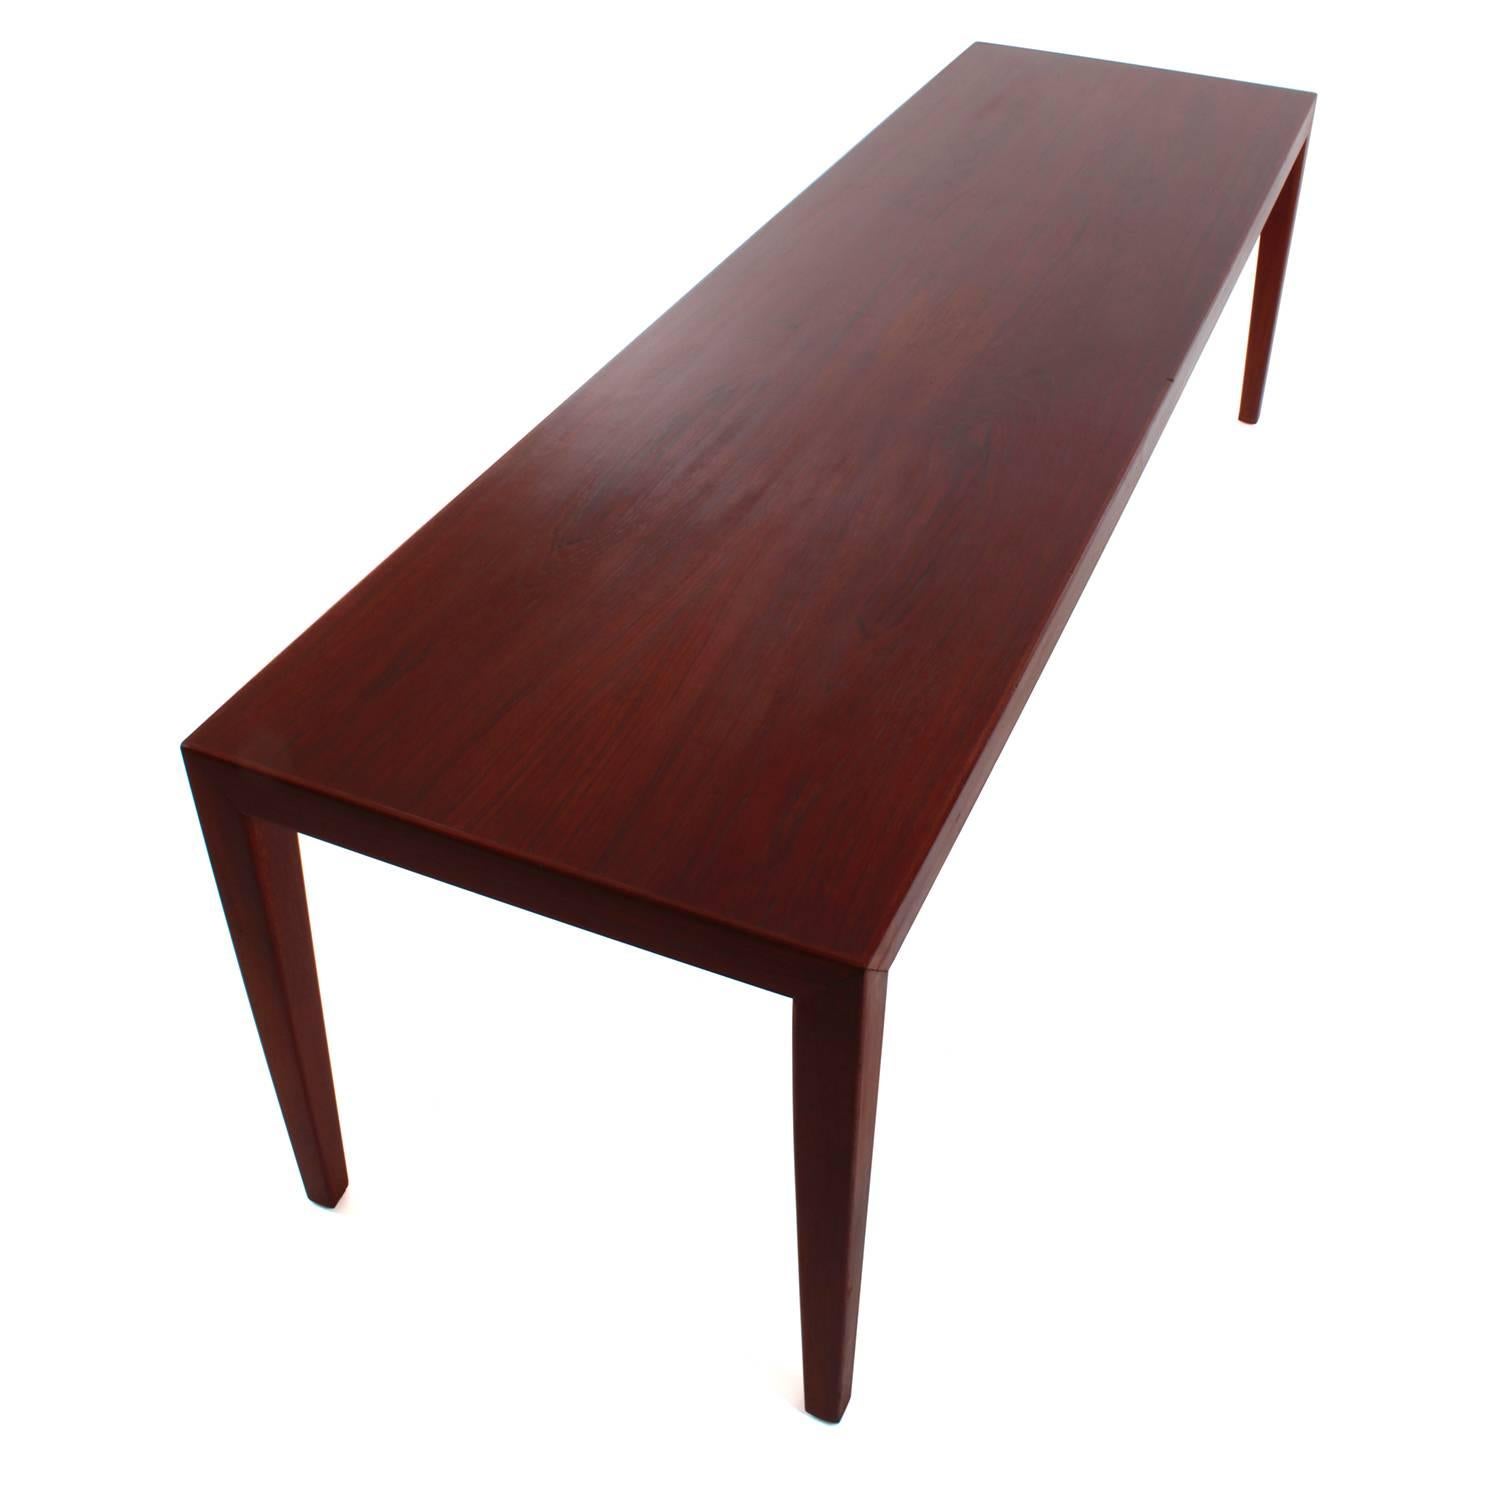 Large rosewood coffee table by Severin Hansen Jr. for Haslev Møbelsnedkeri in the late 1950s - Minimalist Danish Mid-Century Modern coffee table in very good condition!

This is the largest version, measuring 70.9